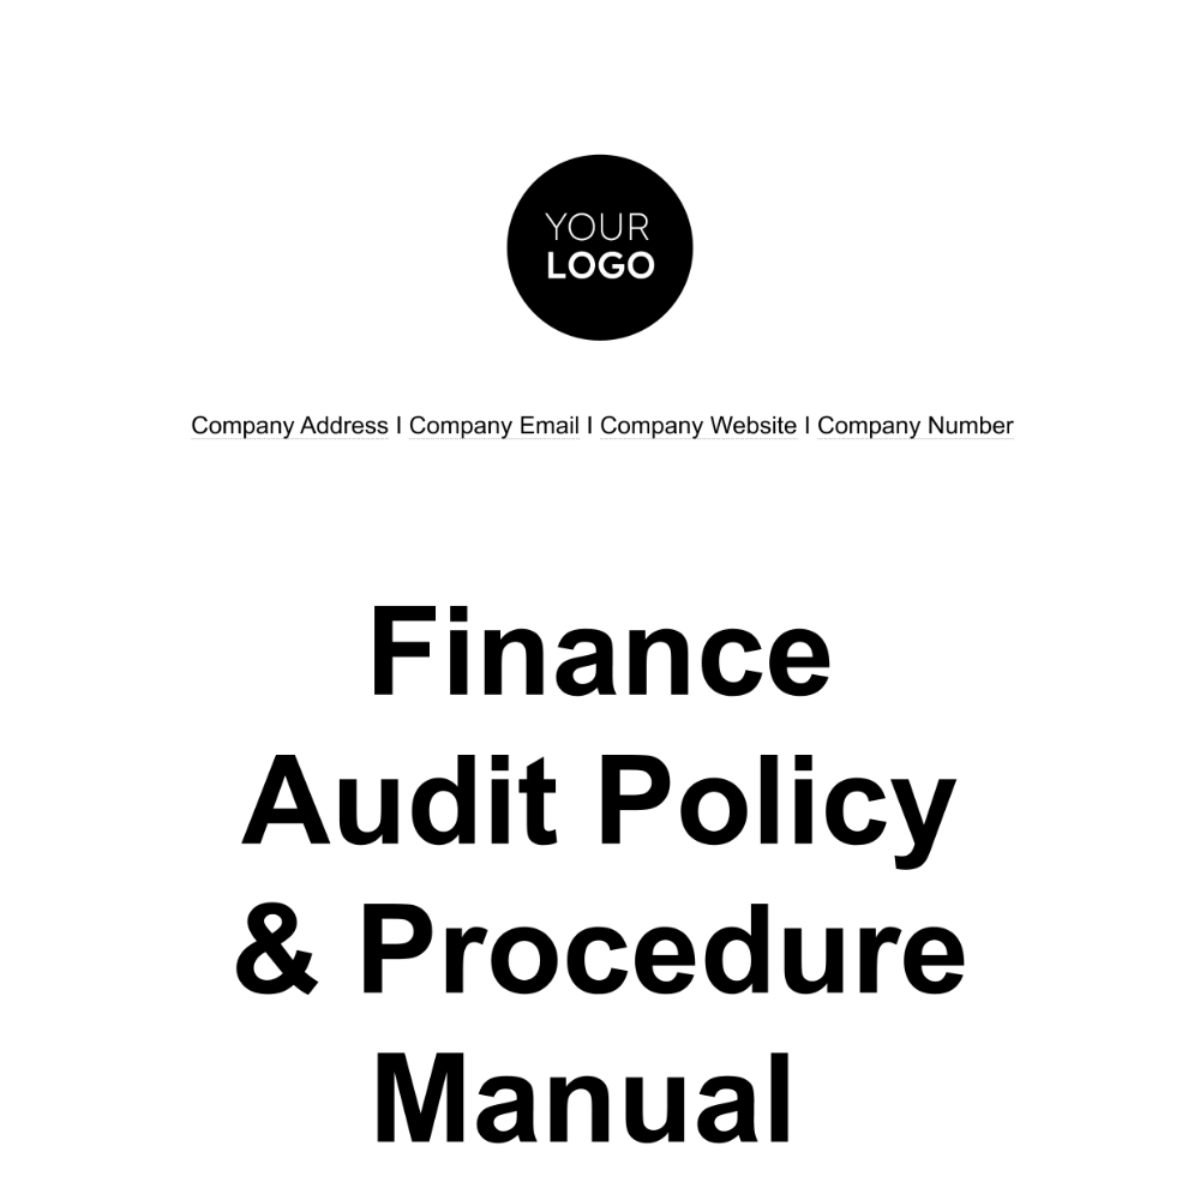 Free Finance Audit Policy & Procedure Manual Template